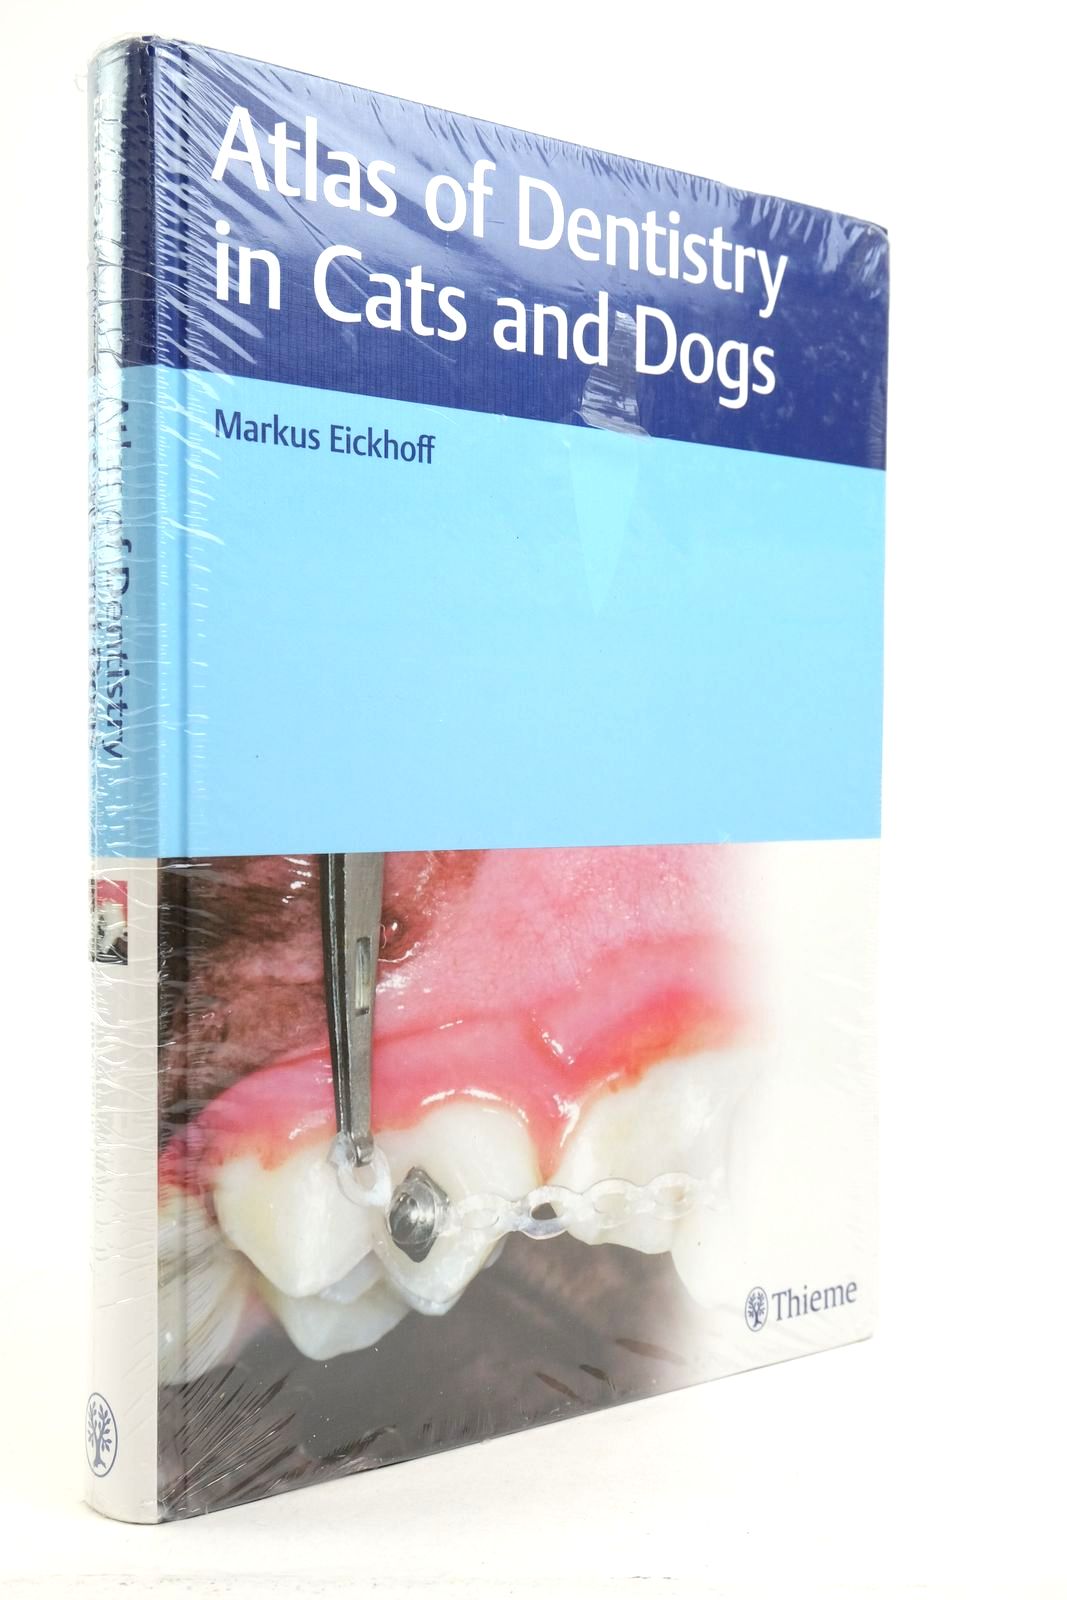 Photo of ATLAS OF DENTISTRY IN CATS AND DOGS written by Eickhoff, Markus published by Thieme (STOCK CODE: 2140433)  for sale by Stella & Rose's Books